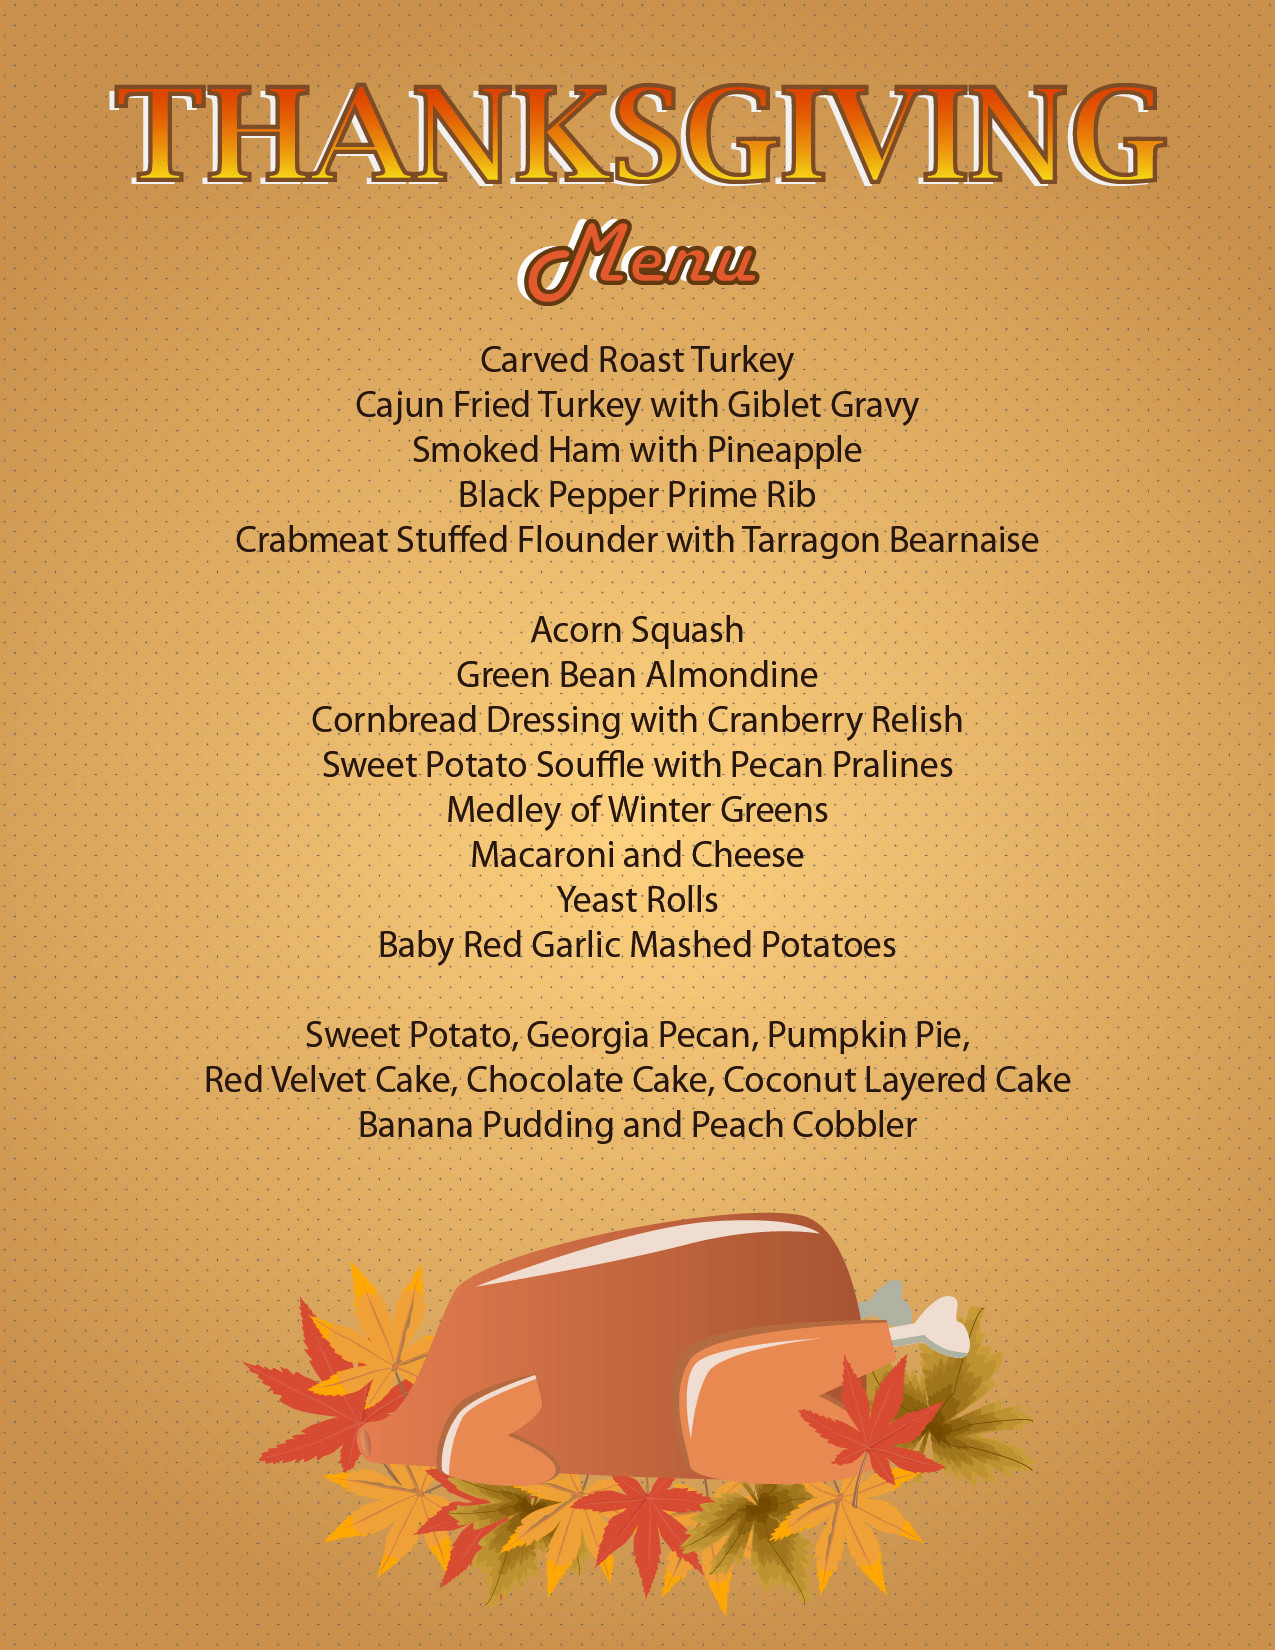 The top 30 Ideas About Thanksgiving Dinner Menu - Most Popular Ideas of ...